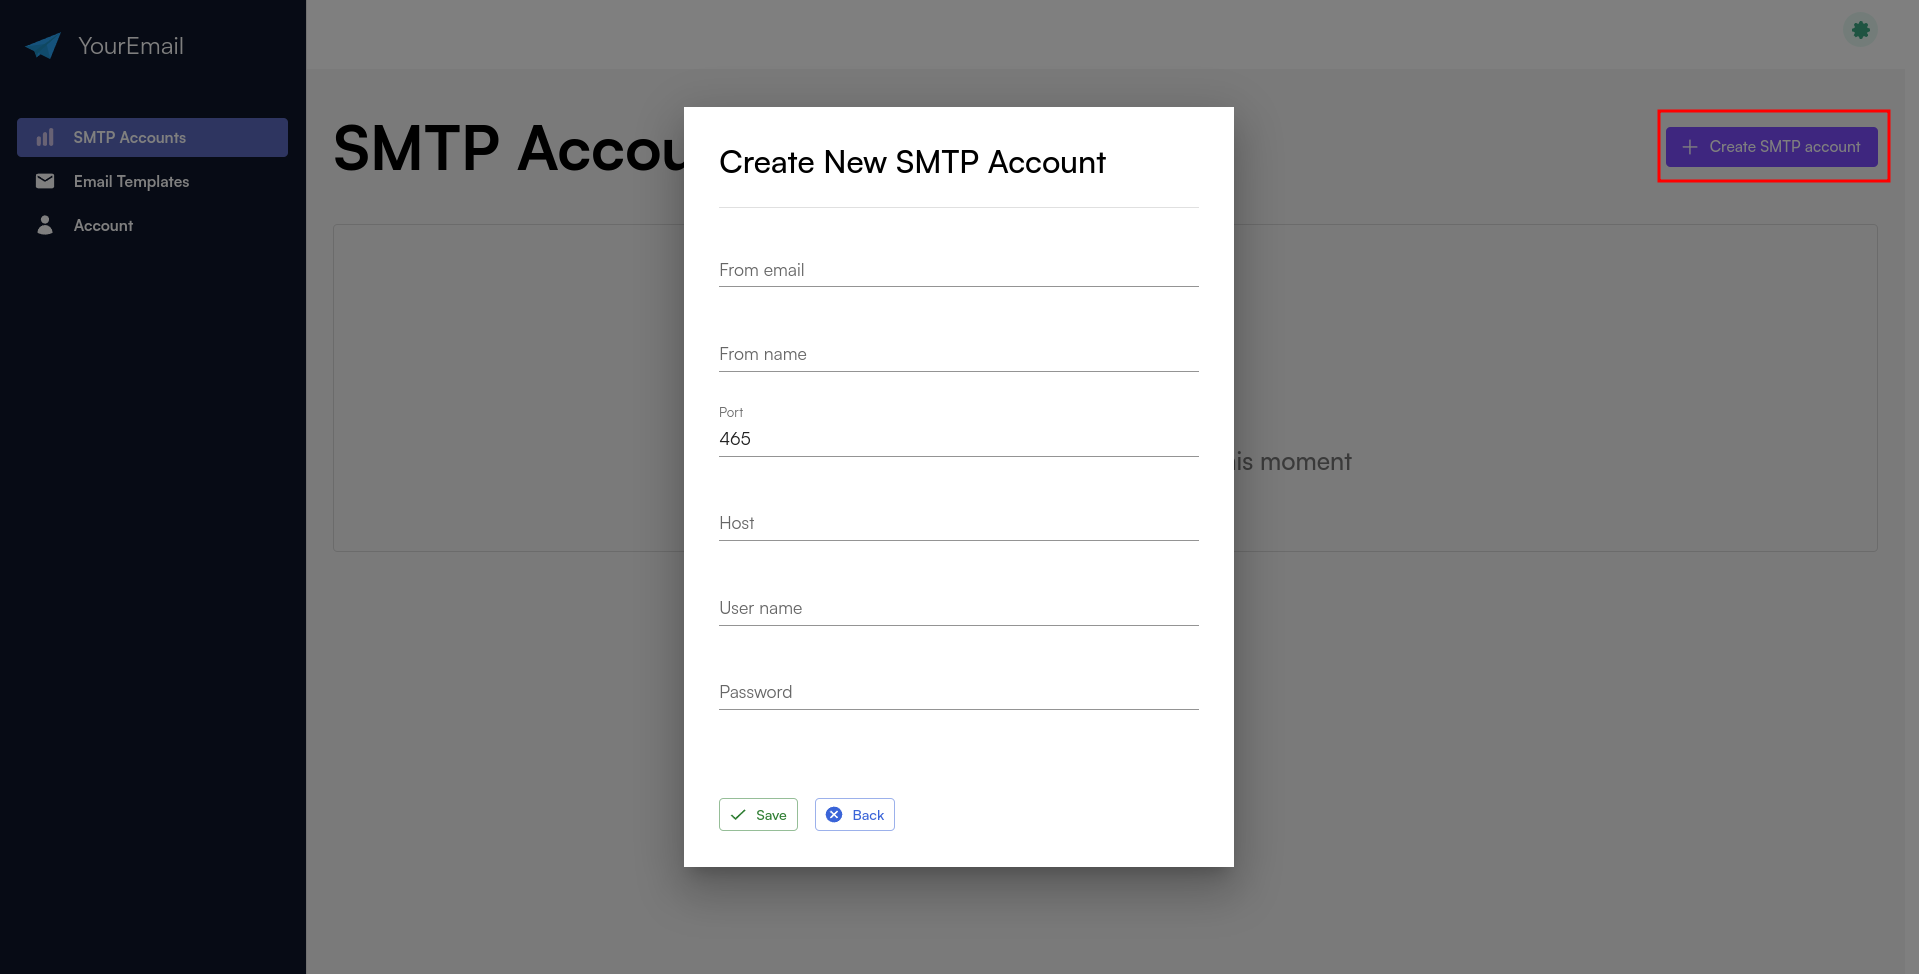 How to create smtp account in youremailapi